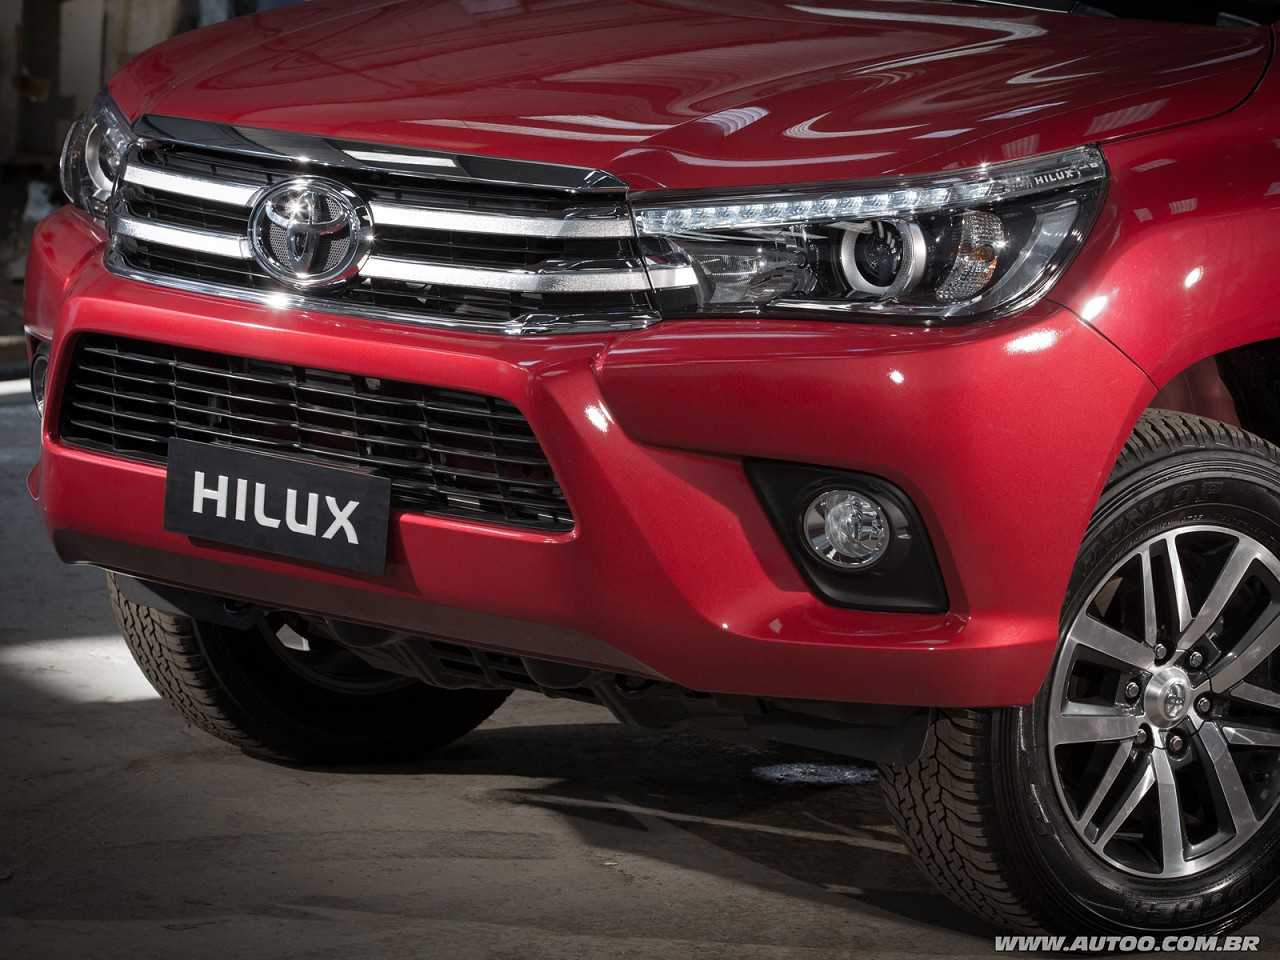 ToyotaHilux 2016 - grade frontal